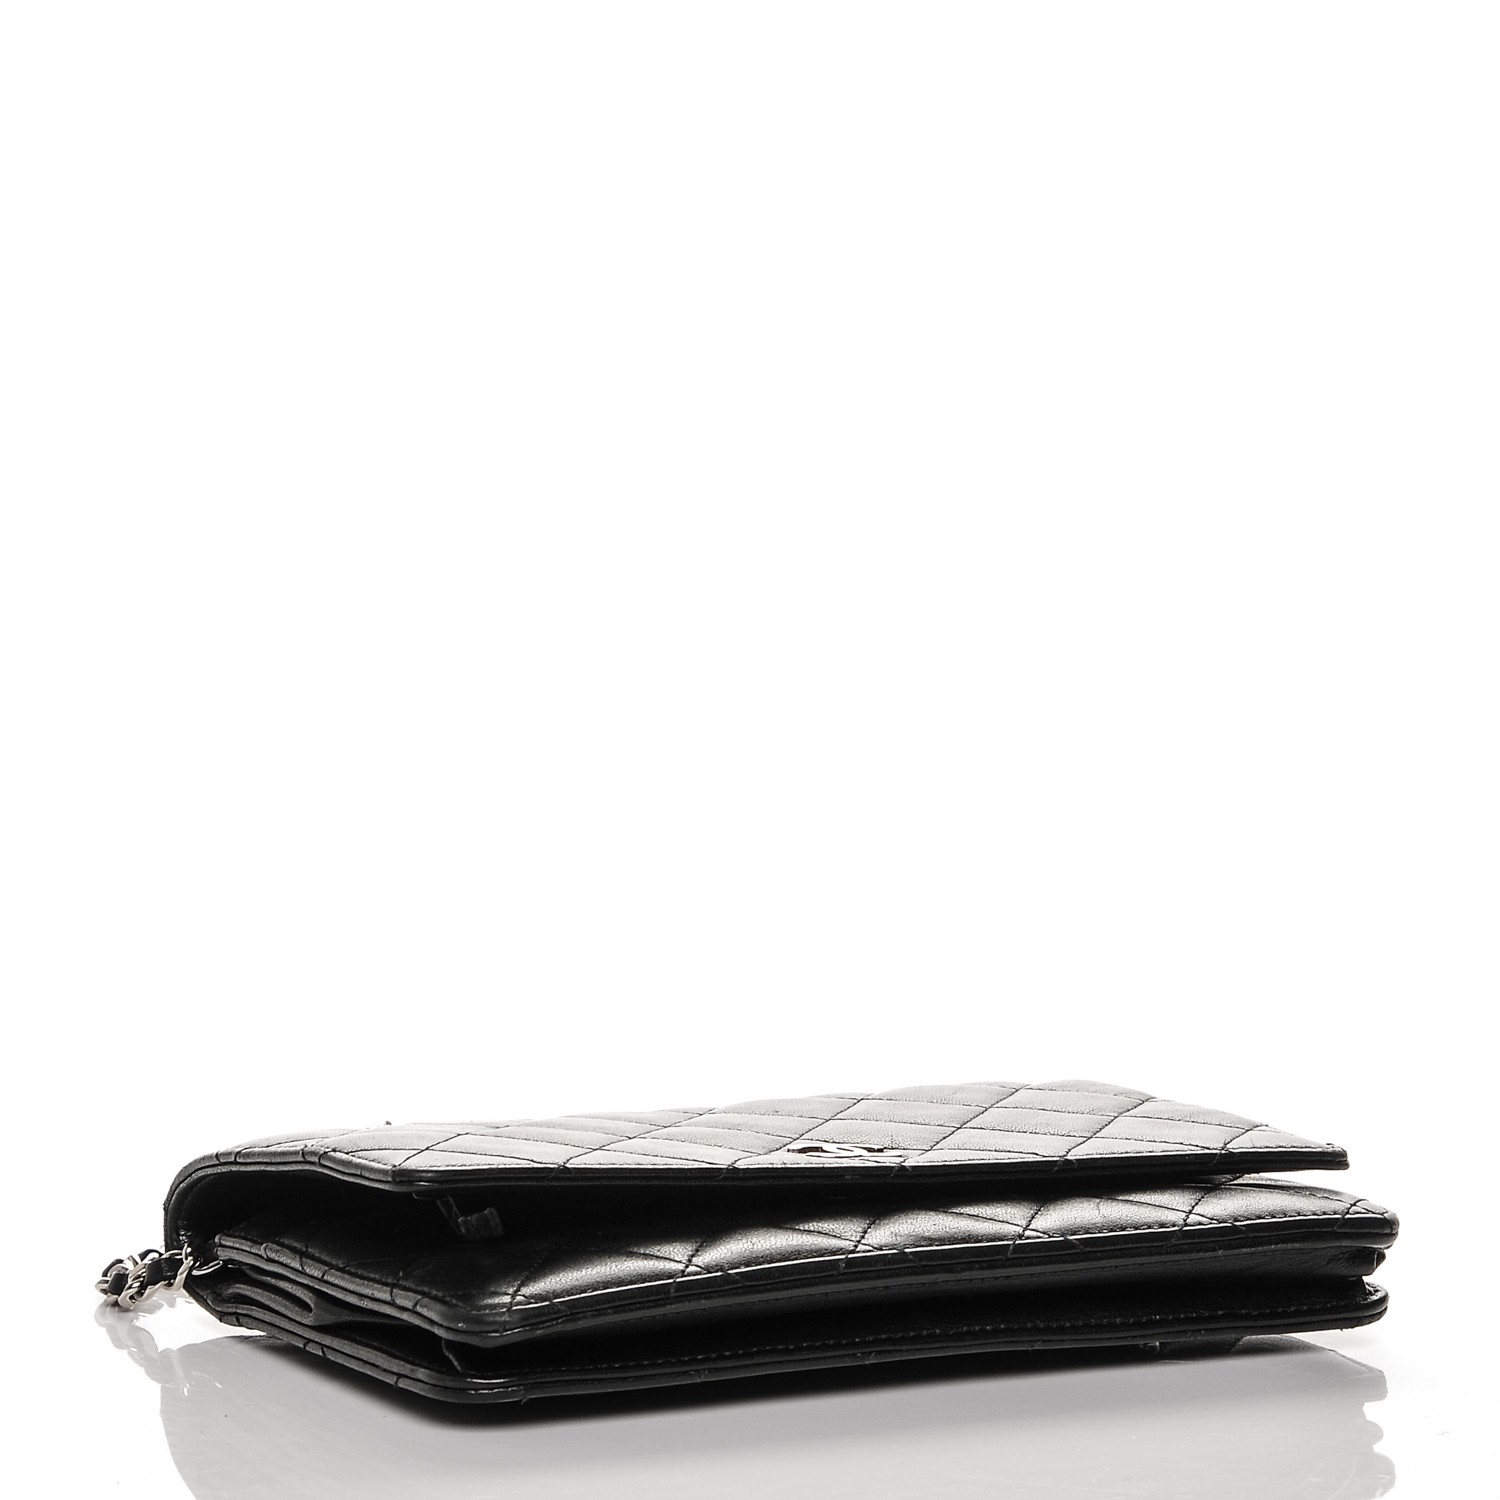 CHANEL Lambskin Quilted Wallet On Chain WOC Black 188510